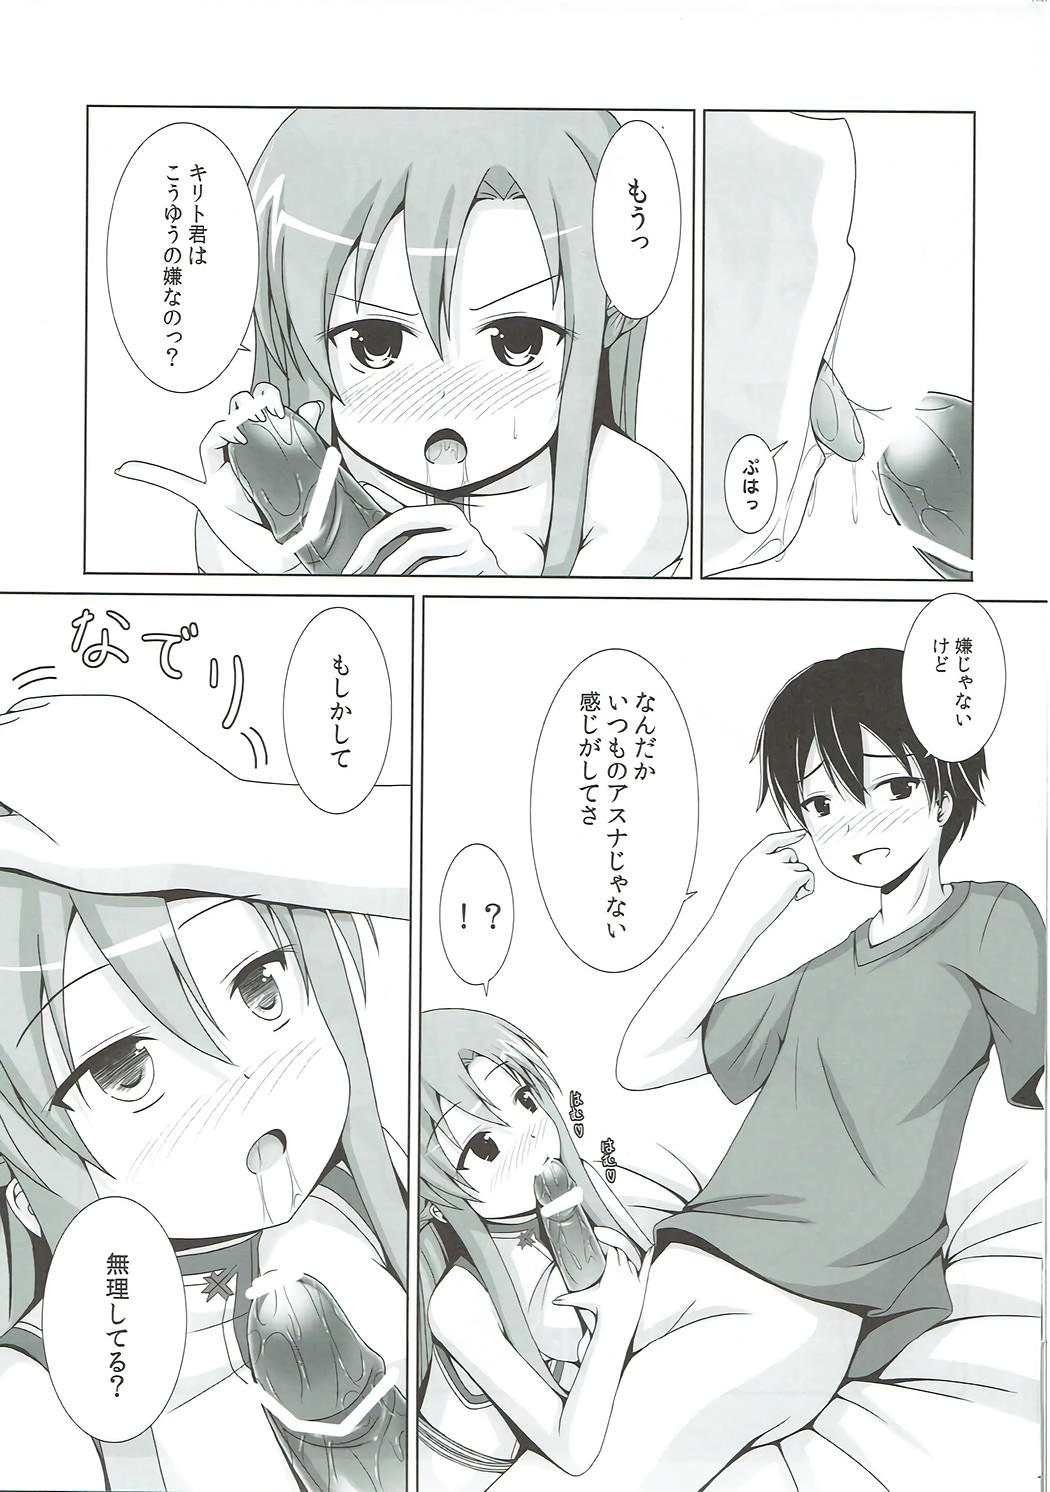 Old Young Kessen Zenjitsu no Etcetera - Sword art online Young Old - Page 10